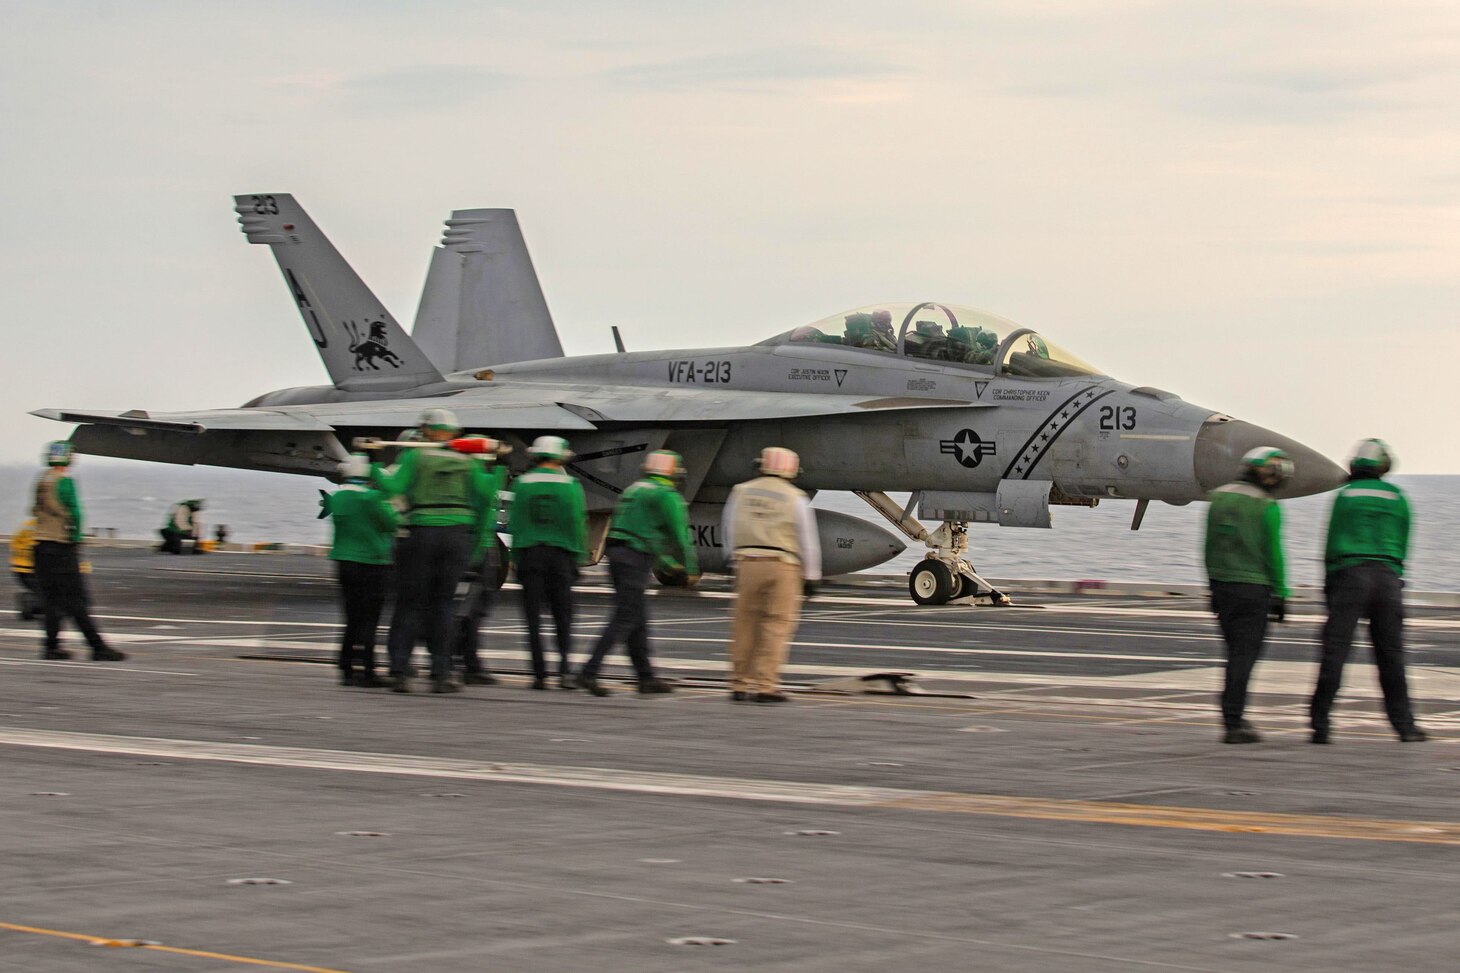 An F/A-18F Super Hornet from Strike Fighter Squadron (VFA) 213 launches off of the flight deck of aircraft carrier USS Gerald R. Ford (CVN 78) using the Electromagnetic Aircraft Launching System (EMALS), March 10.